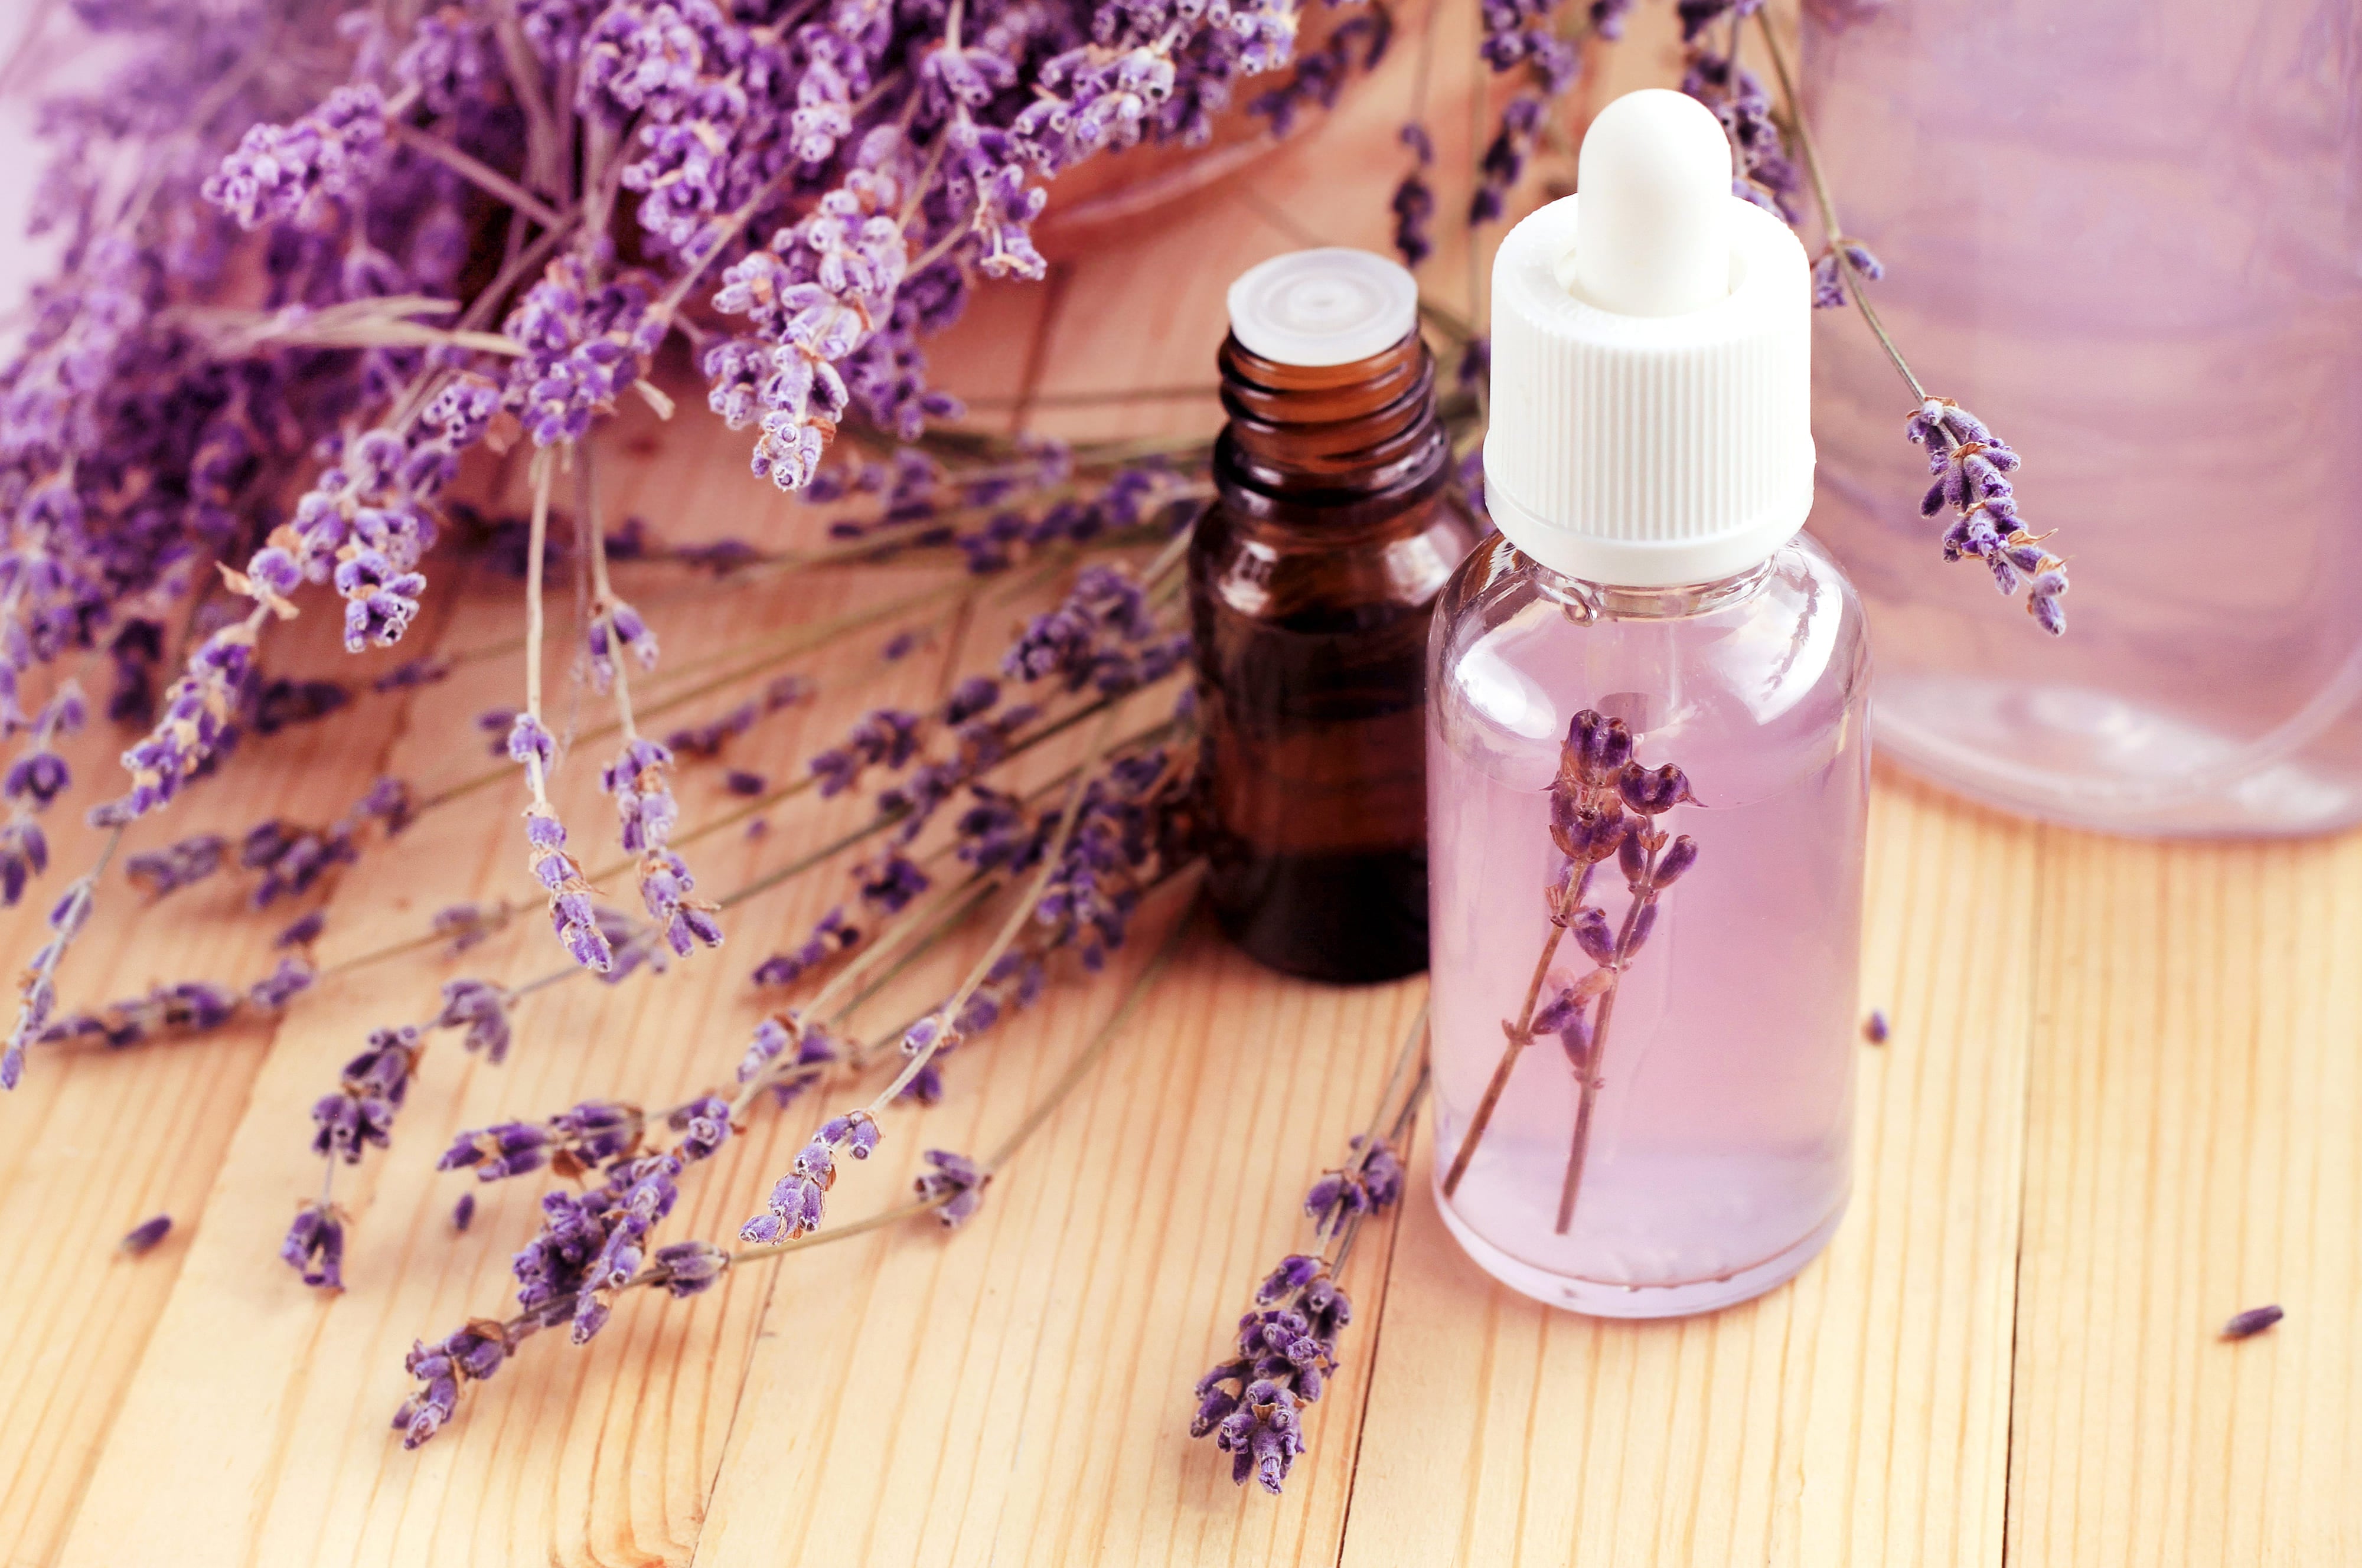 What Blends Well With Lavender Essential Oil?